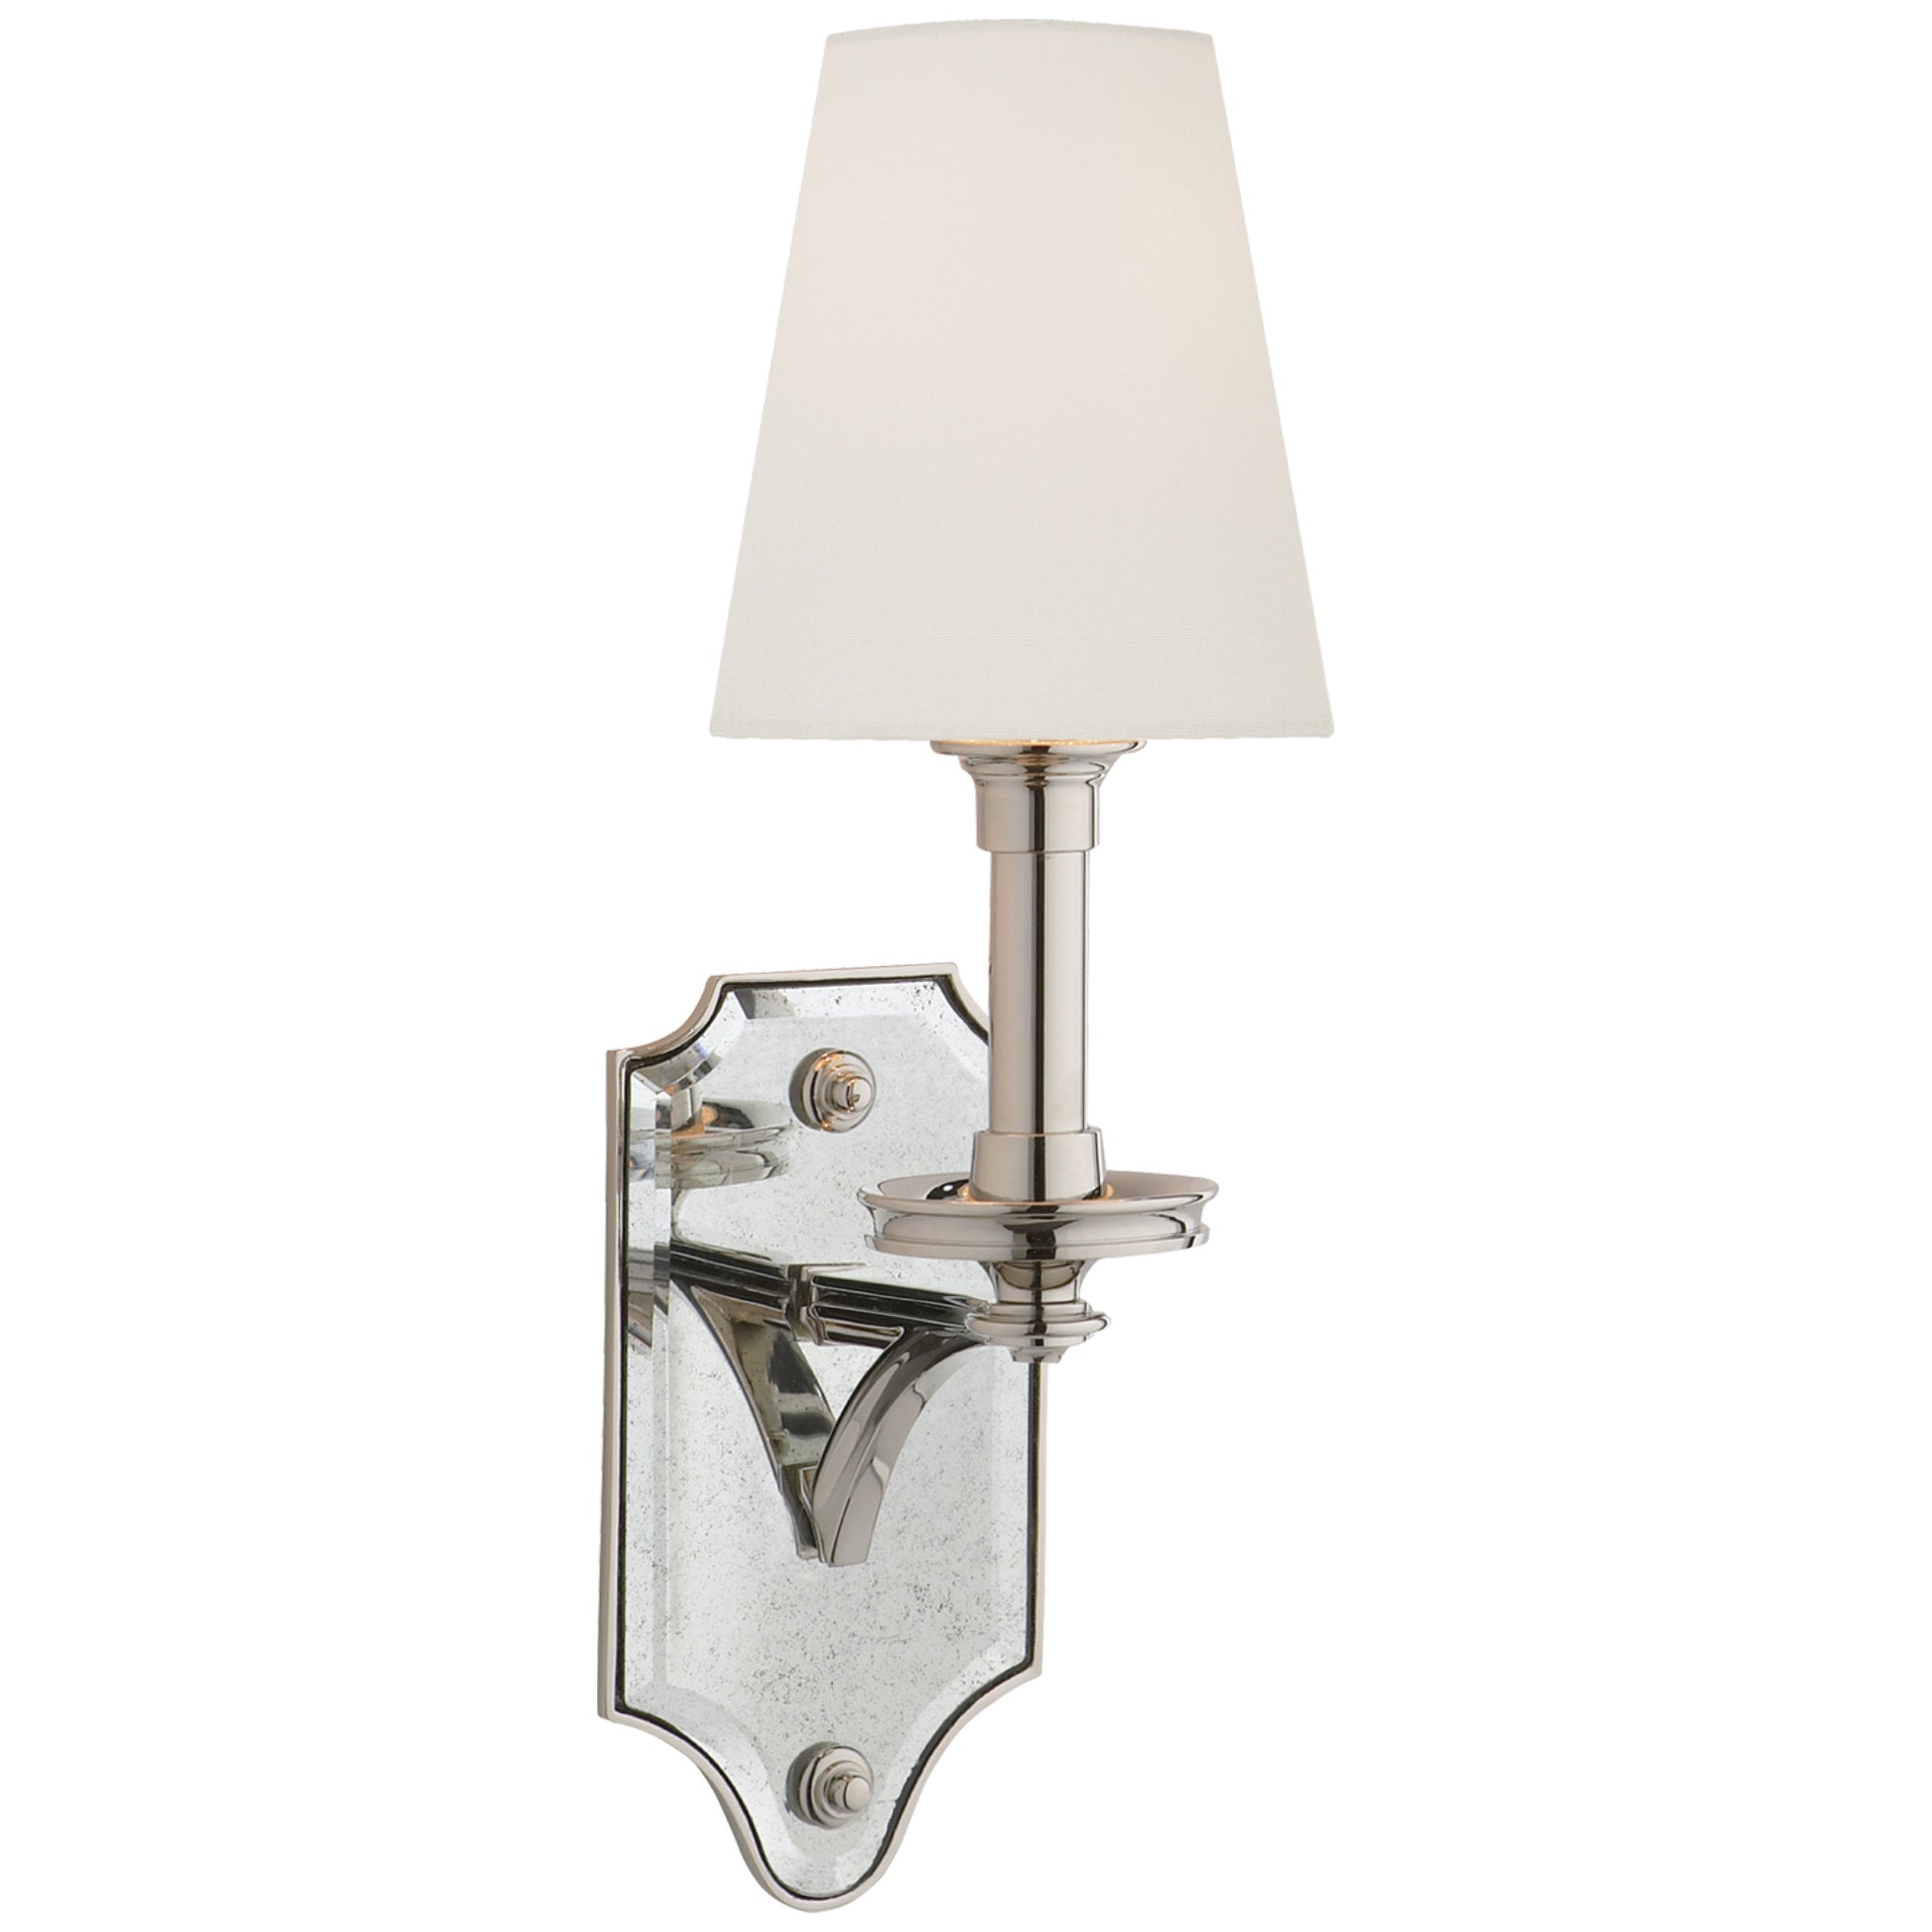 Thomas O'Brien Verona Mirrored Sconce in Polished Nickel with Linen Shade